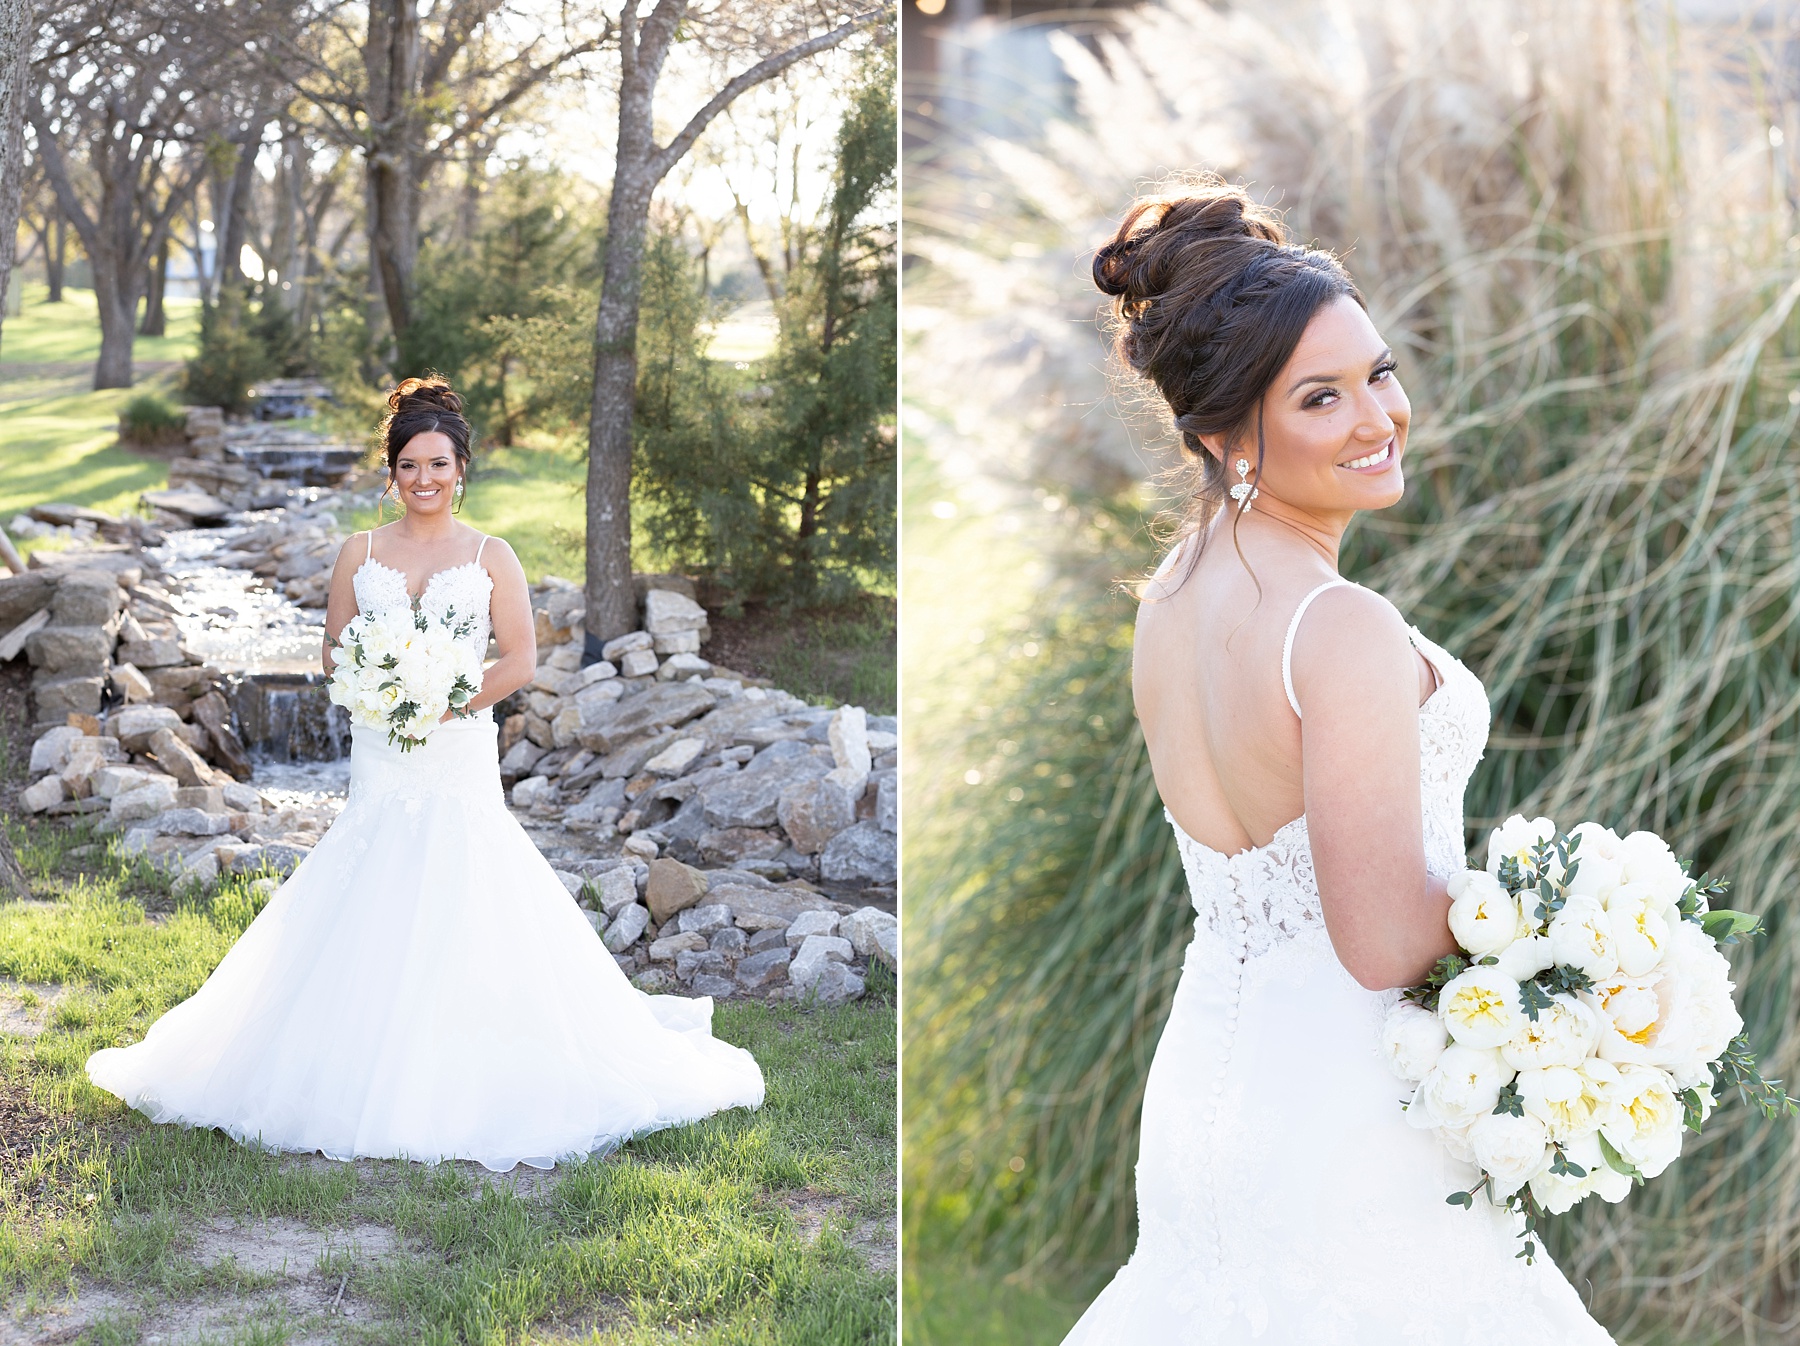 Randi Michelle photographs bride-to-be in lace gown with all-white wedding bouquet in Fort Worth TX